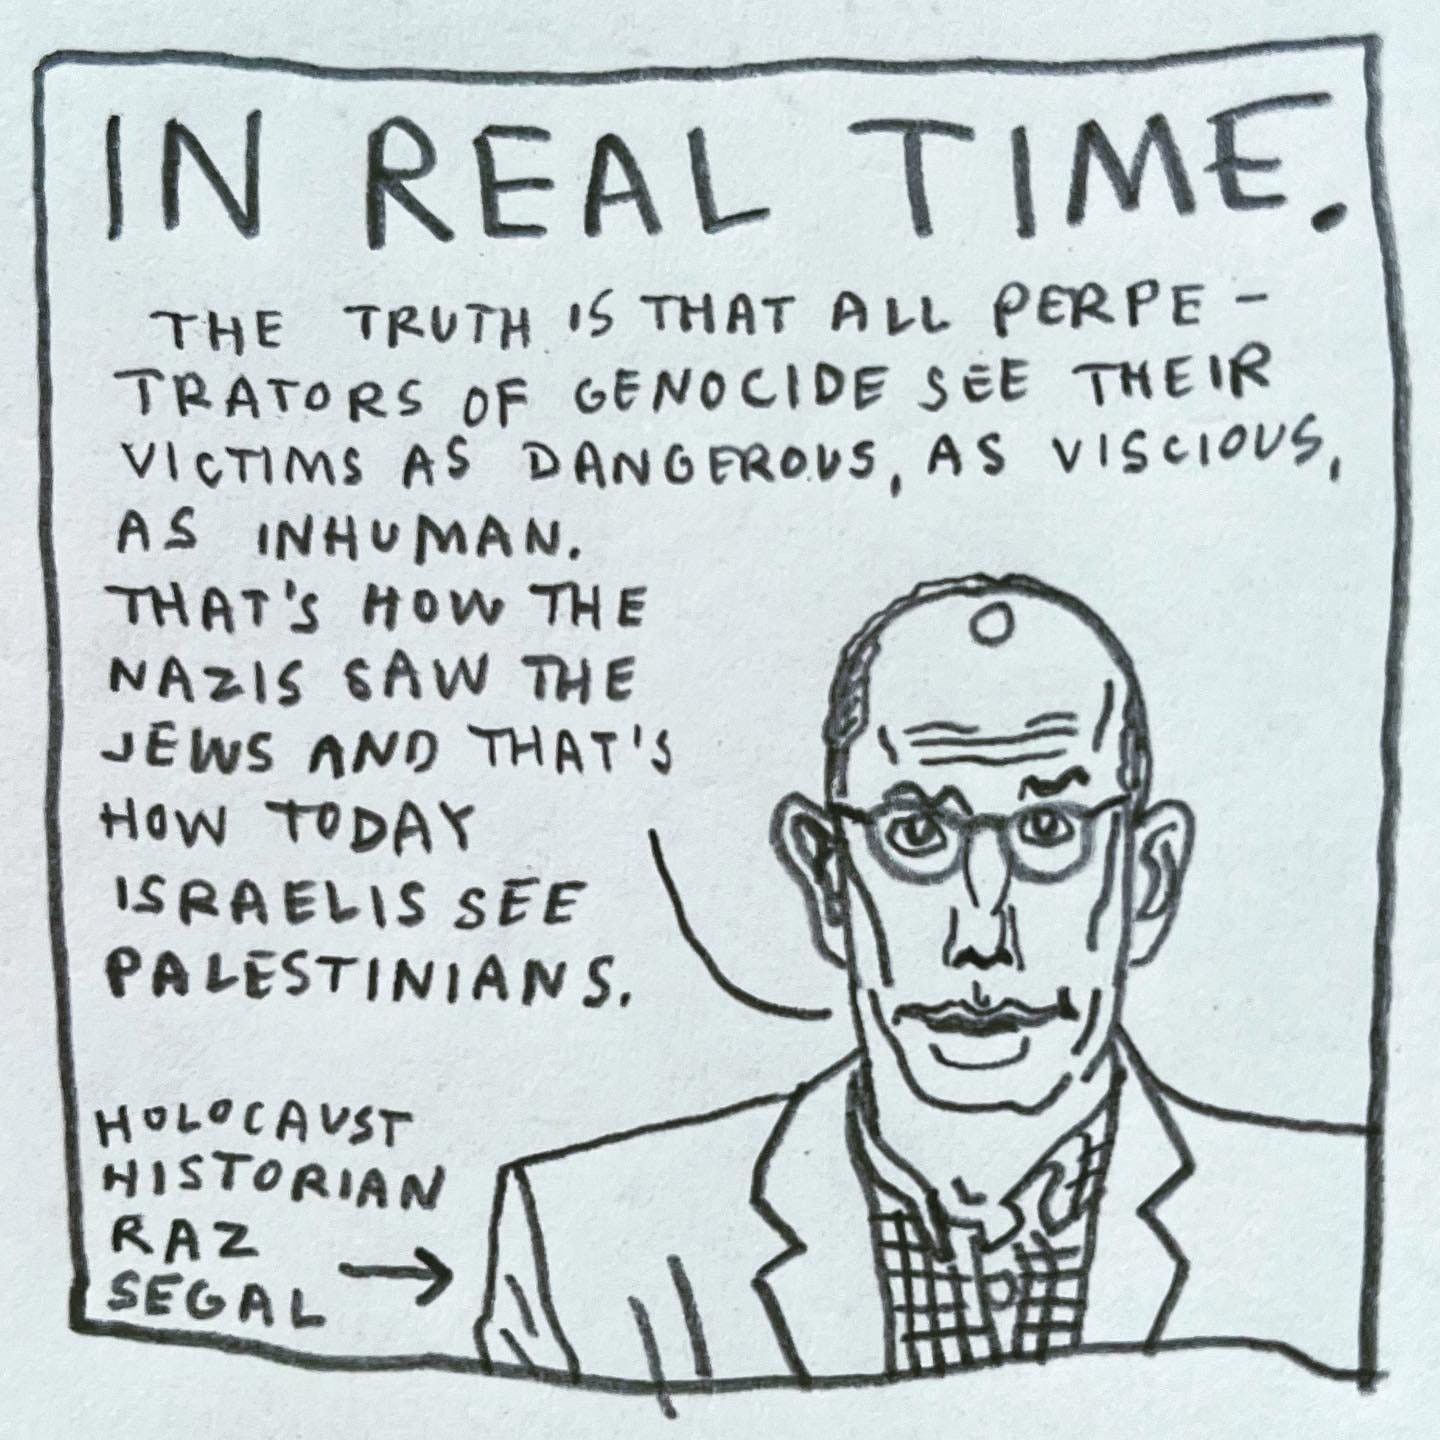 Panel 4: in real time. Image: A portrait is a concerned Israeli scholar wearing glasses and a checked shirt. An arrow pointing to him is labeled “Holocaust historian Raz Segal.” He is saying, ”The truth is that all perpetrators of genocide see their victims as dangerous, as vicious, as inhuman. That's how the Nazis saw the Jews and that's how today Israelis see Palestinians.”